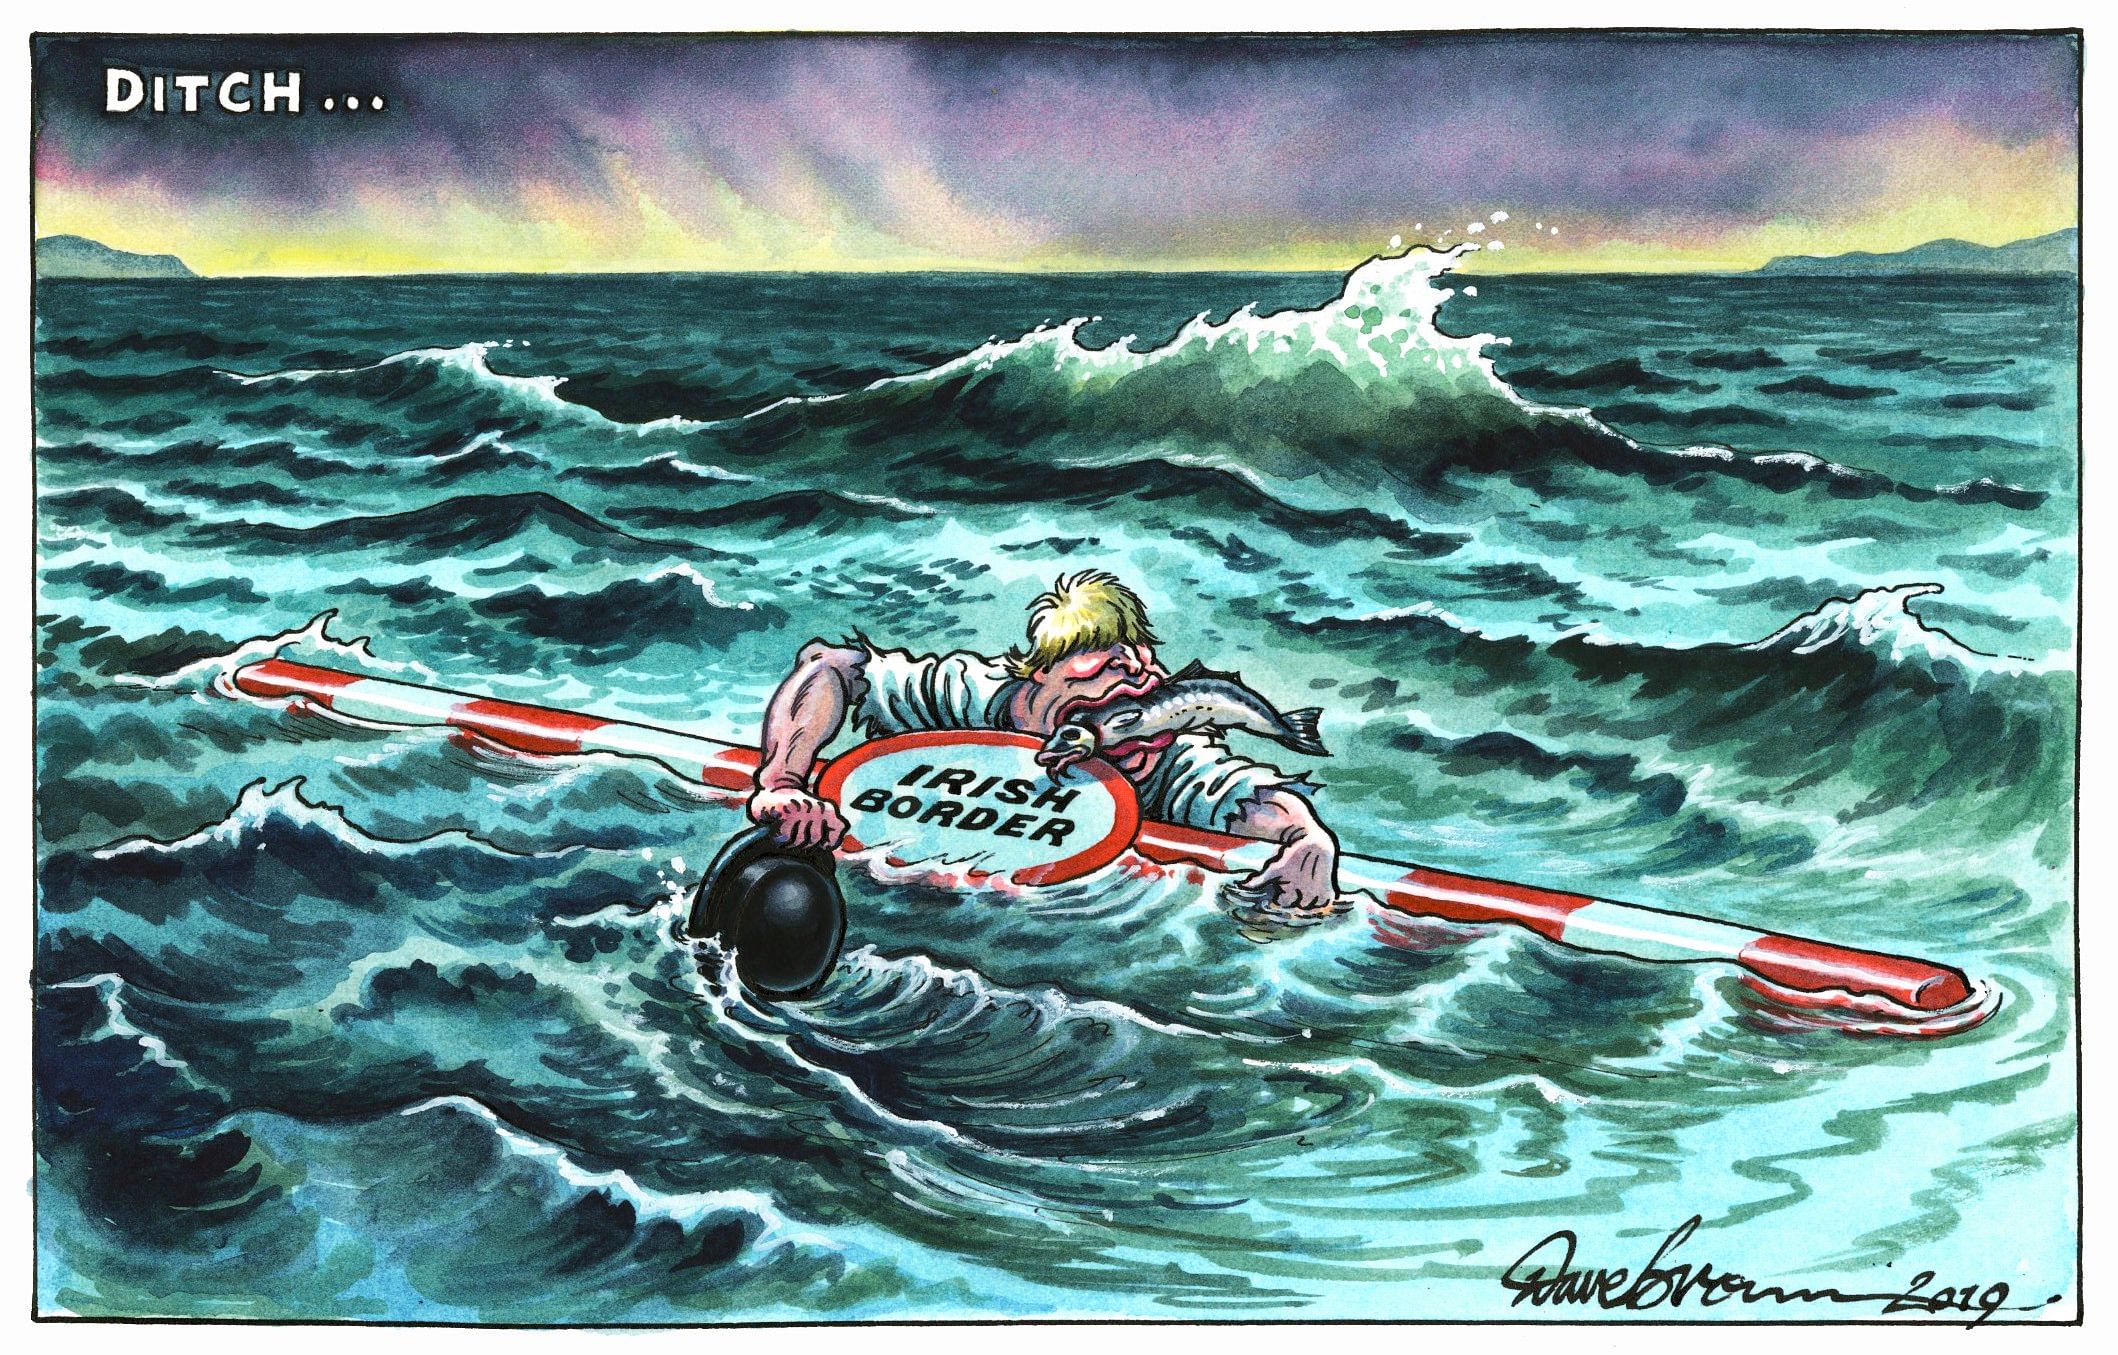 Dave Brown | The Independent 